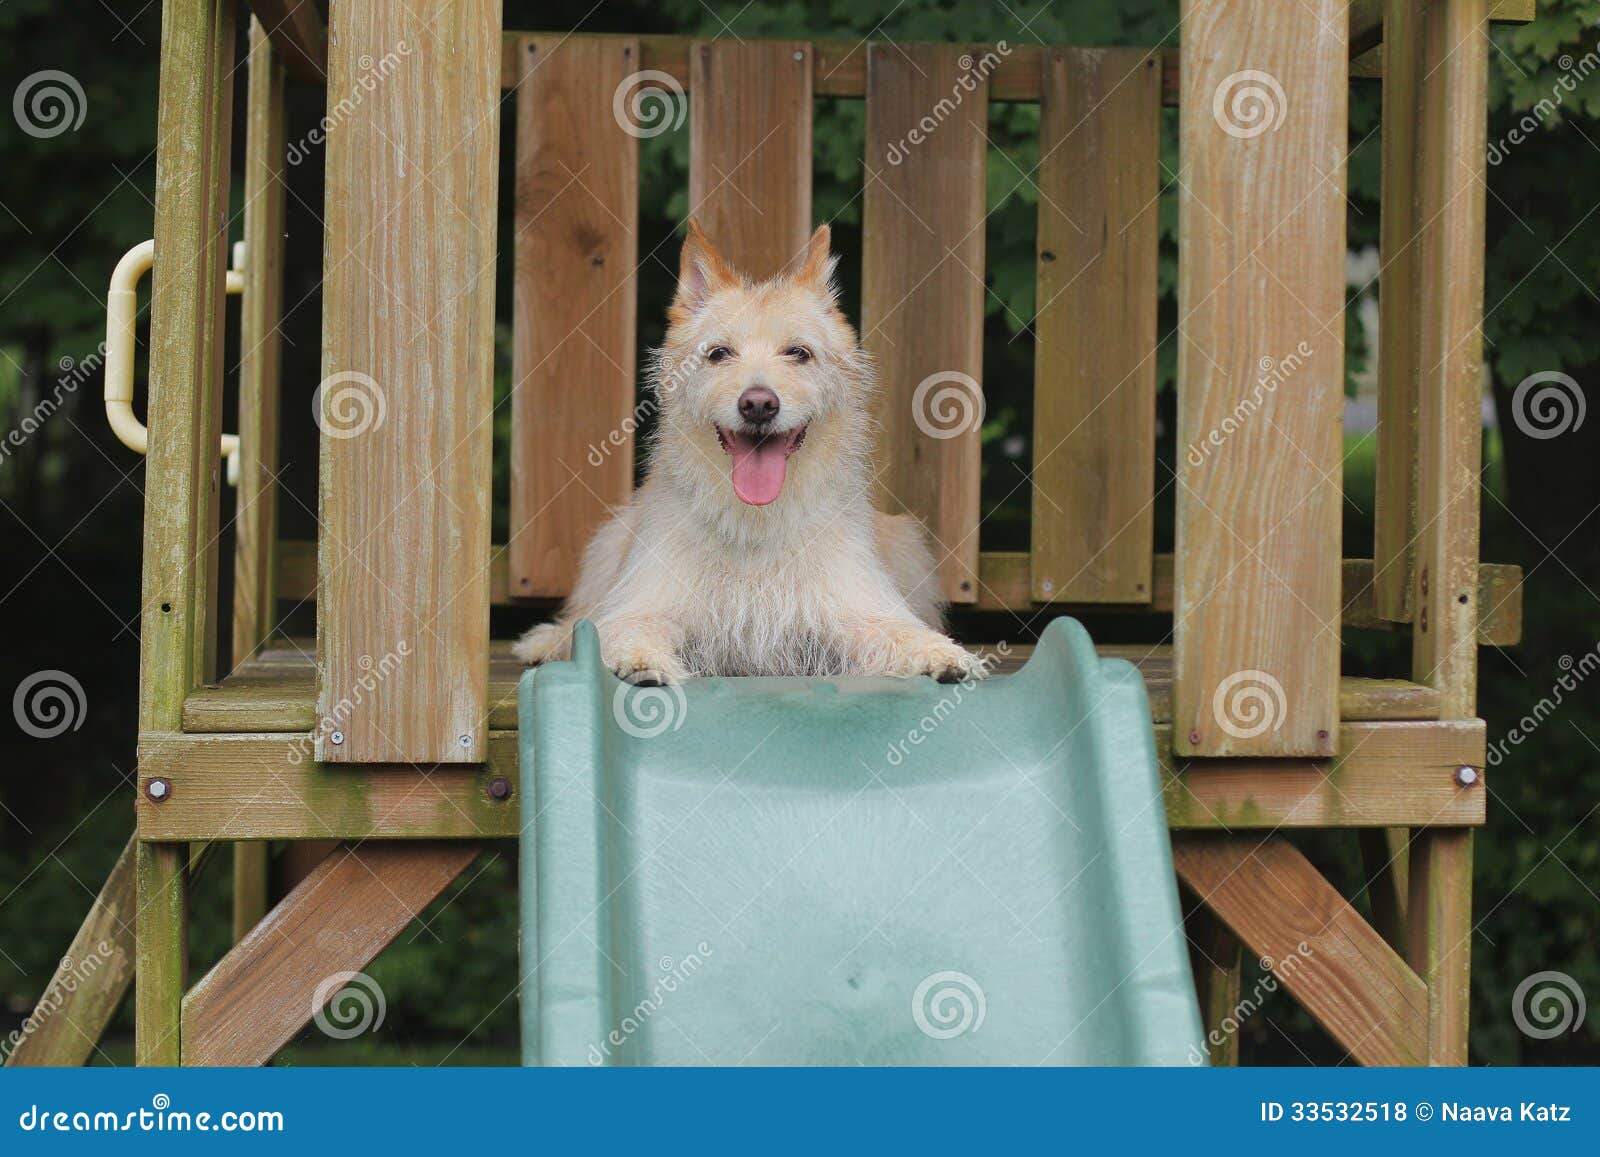 1,500+ Dog Slide Stock Photos, Pictures & Royalty-Free Images